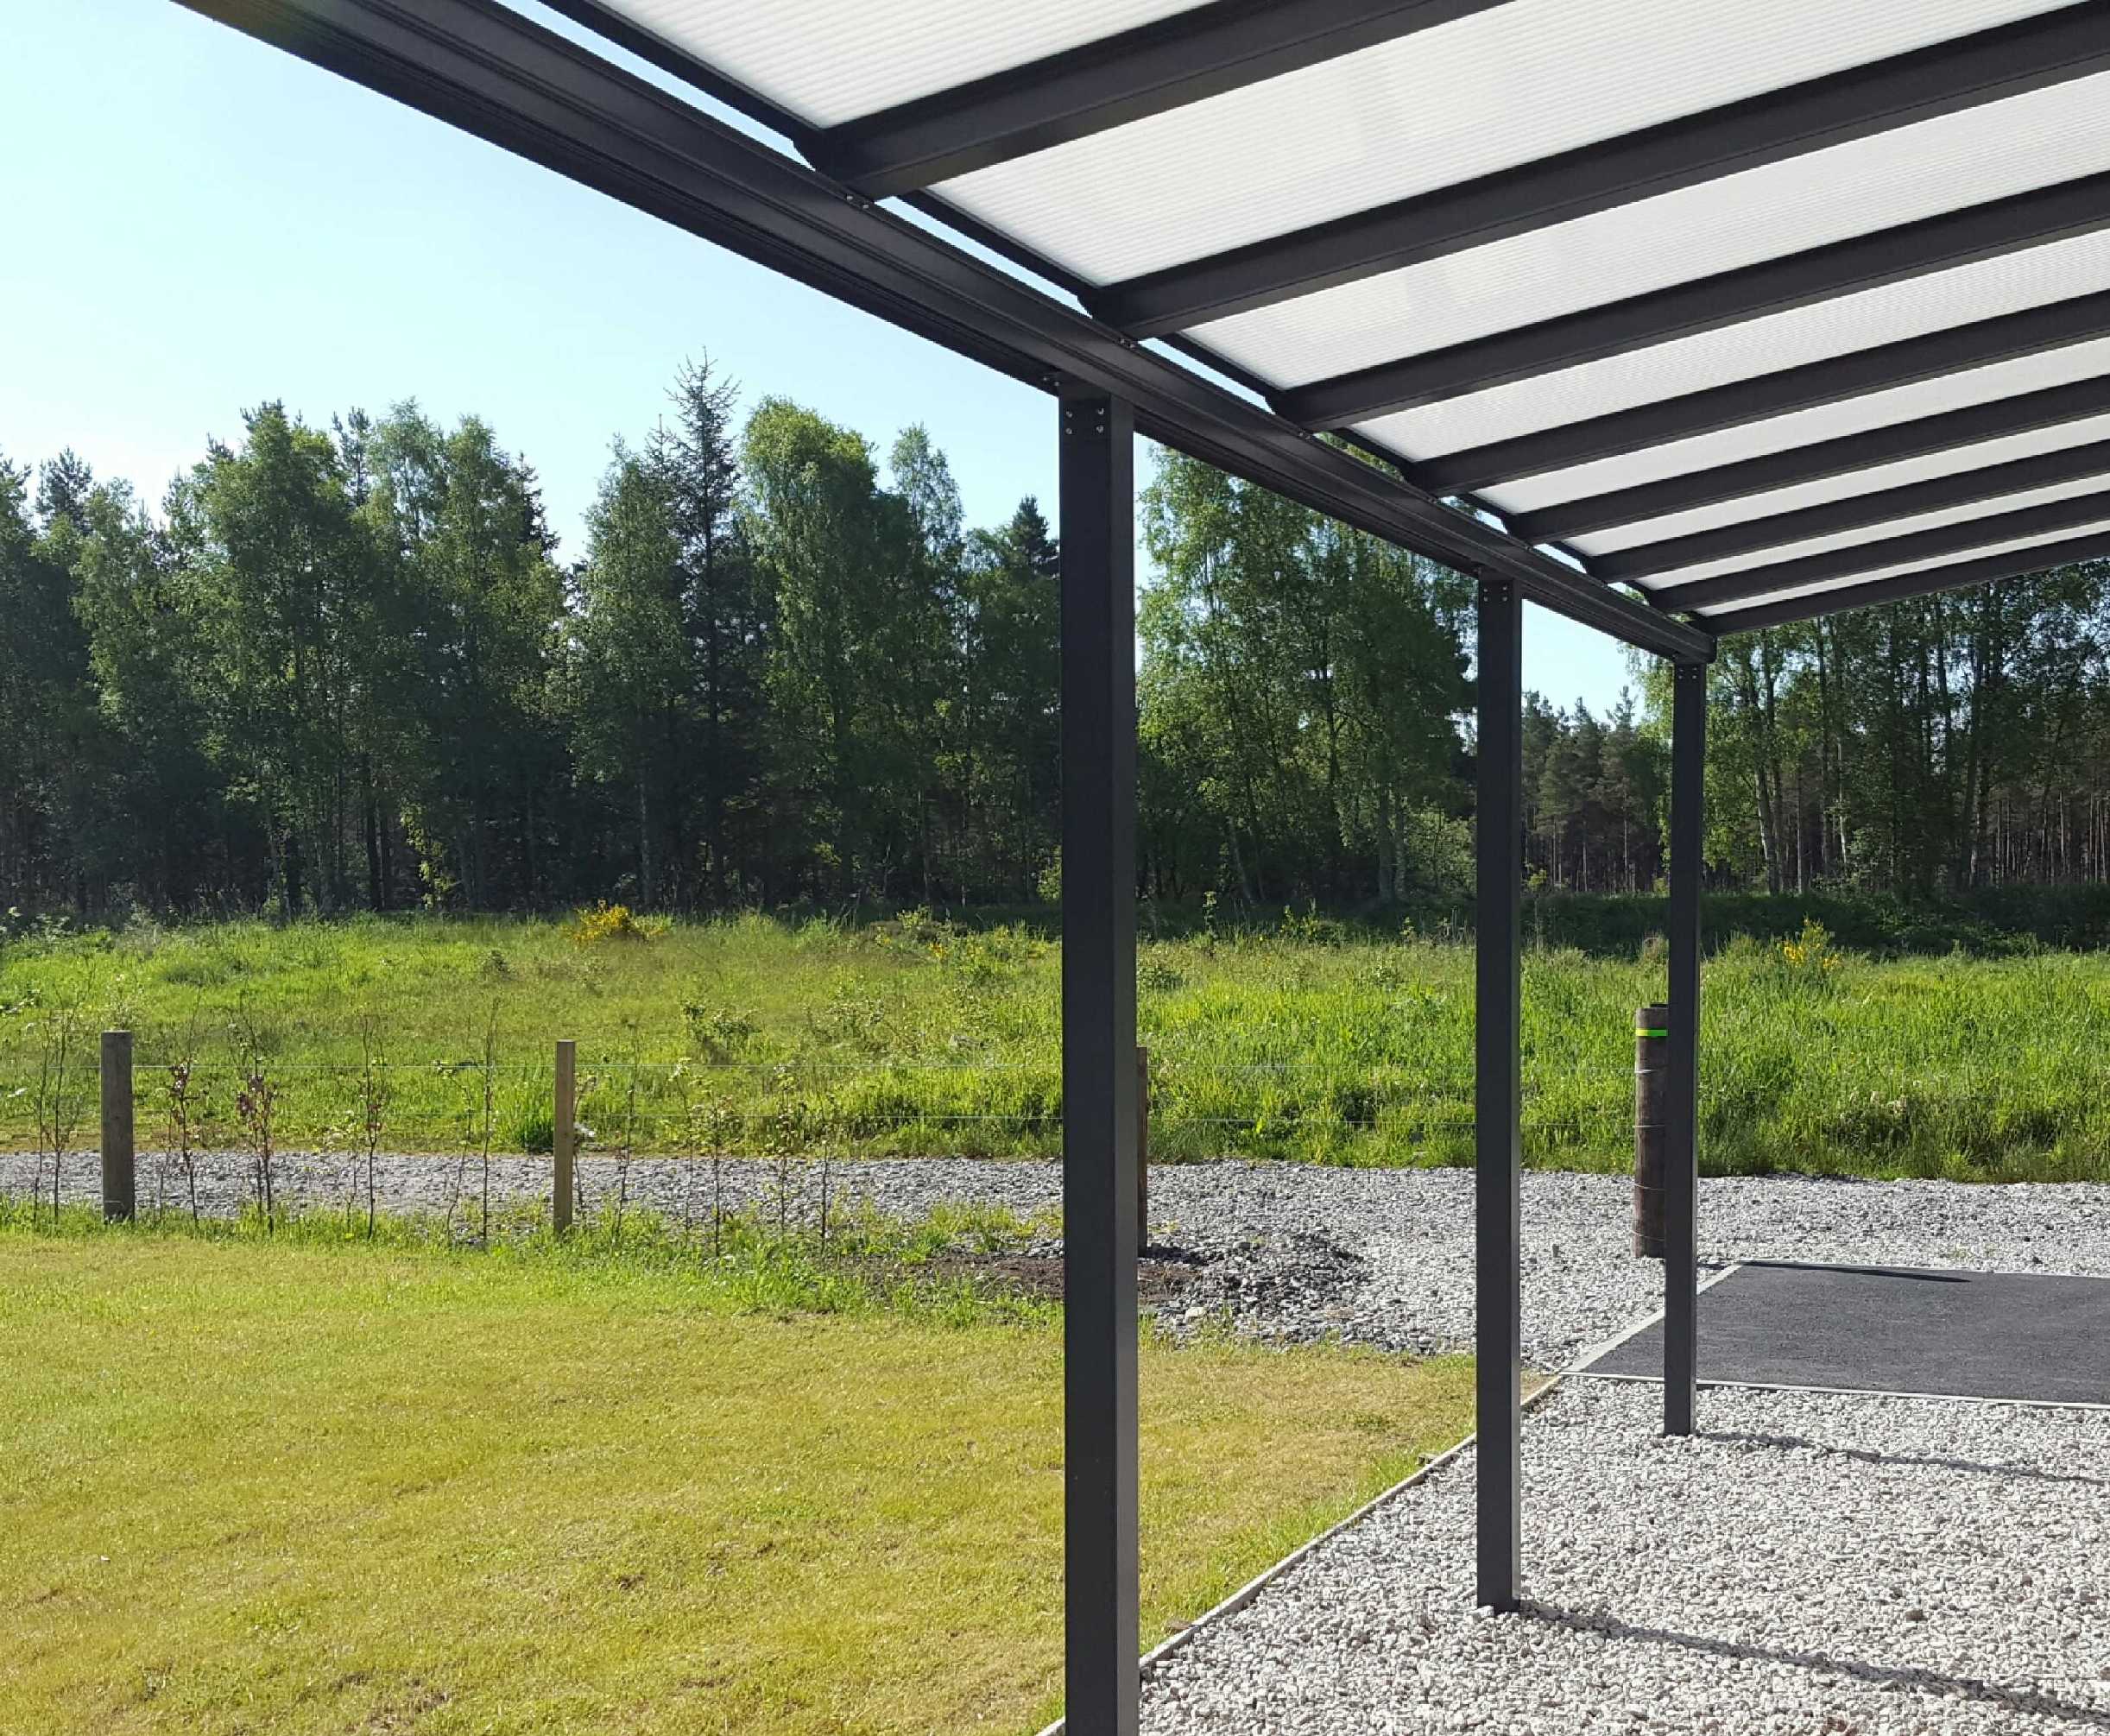 Omega Smart Lean-To Canopy, Anthracite Grey, UNGLAZED for 6mm Glazing - 7.0m (W) x 2.5m (P), (4) Supporting Posts